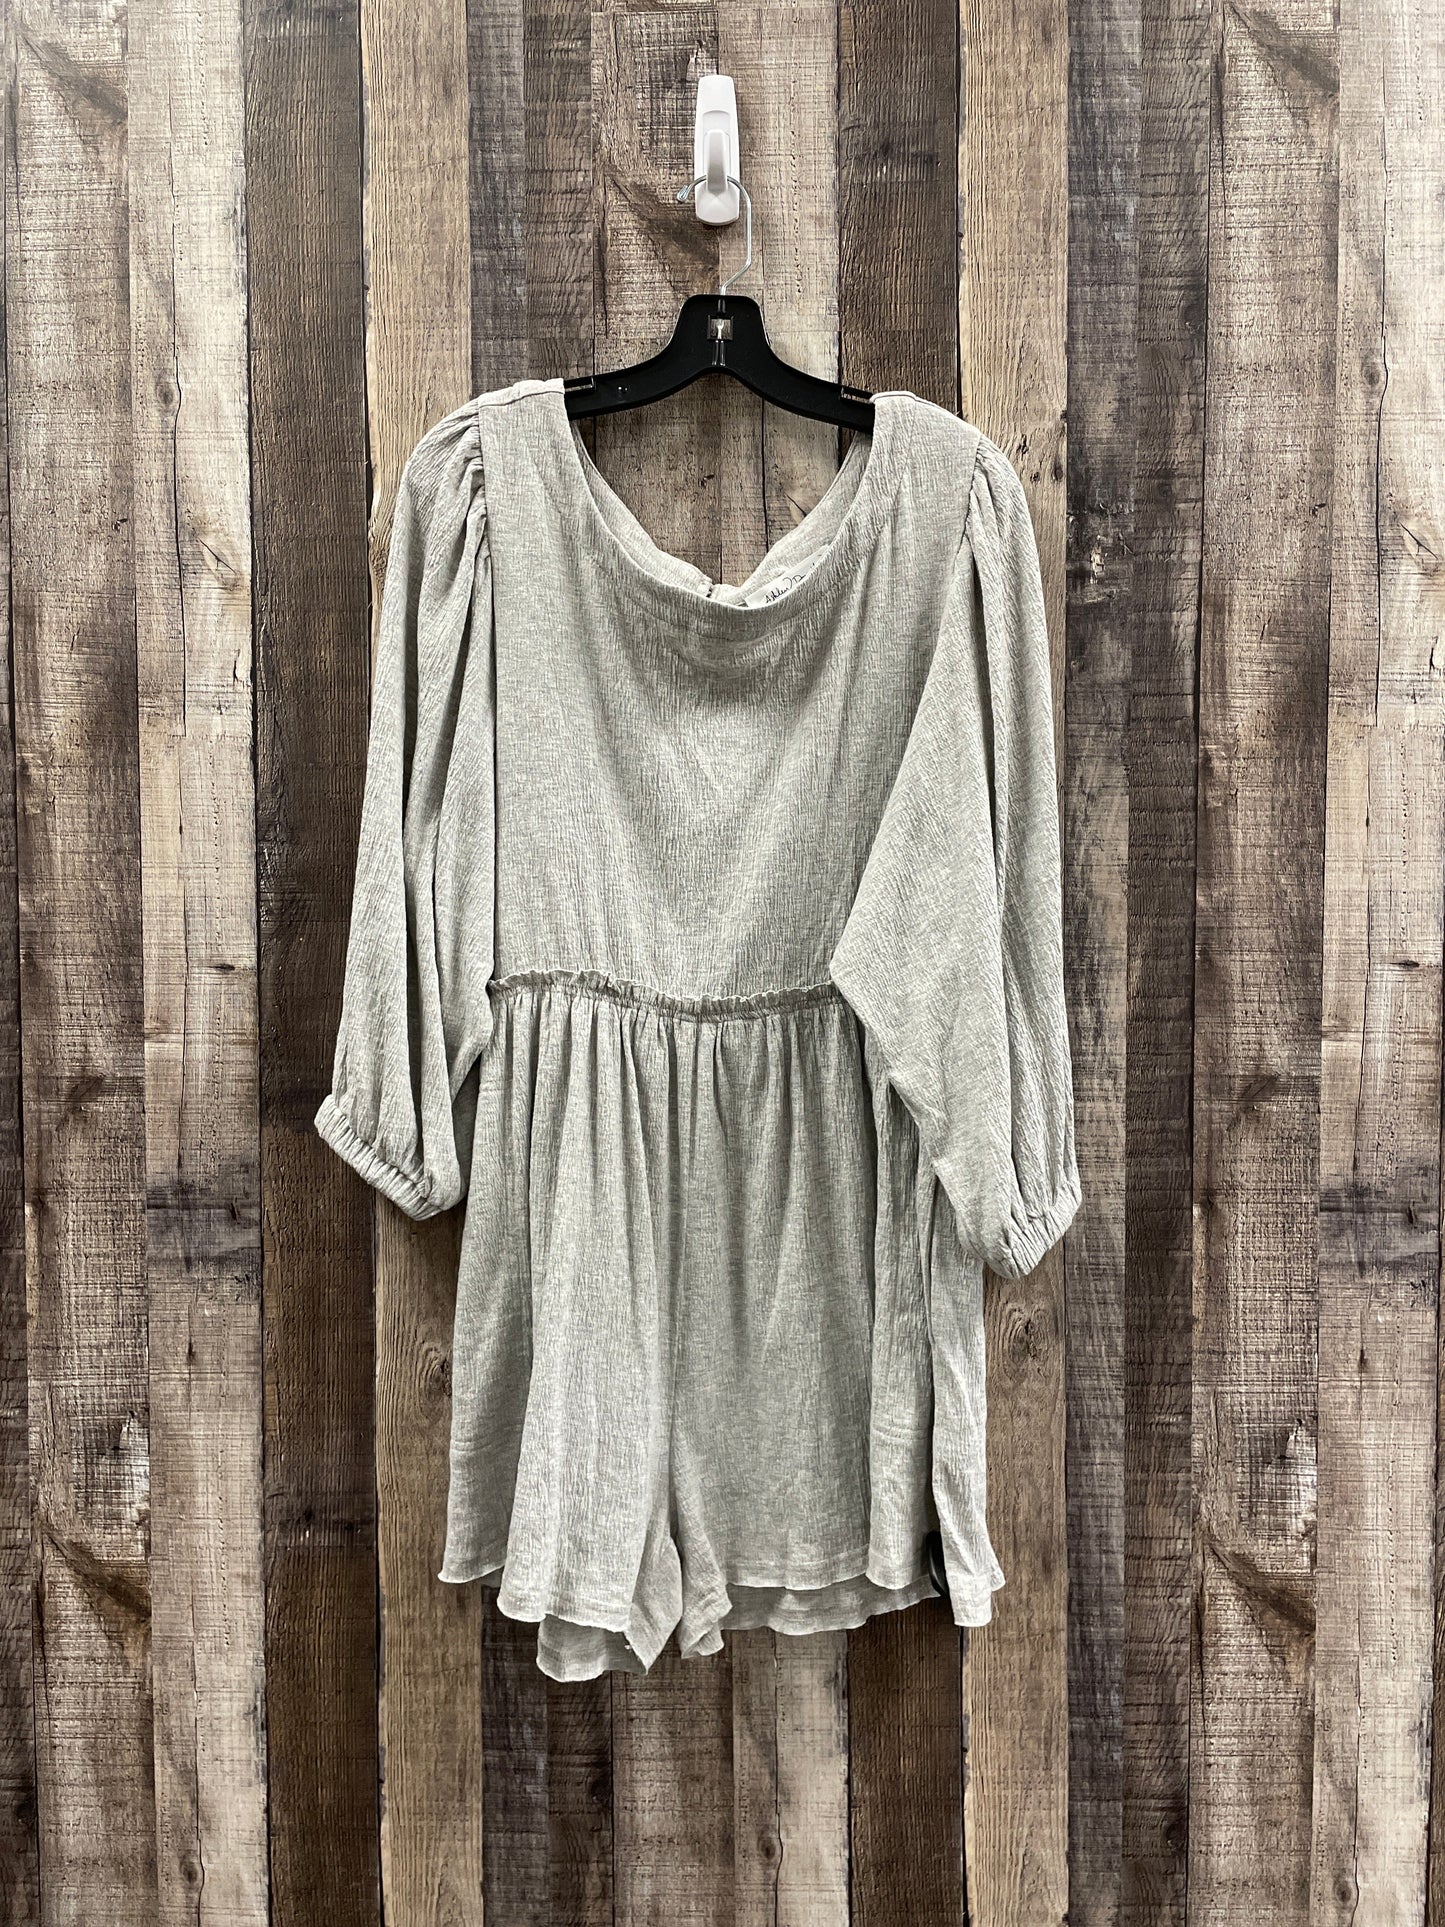 Romper By Cme  Size: L